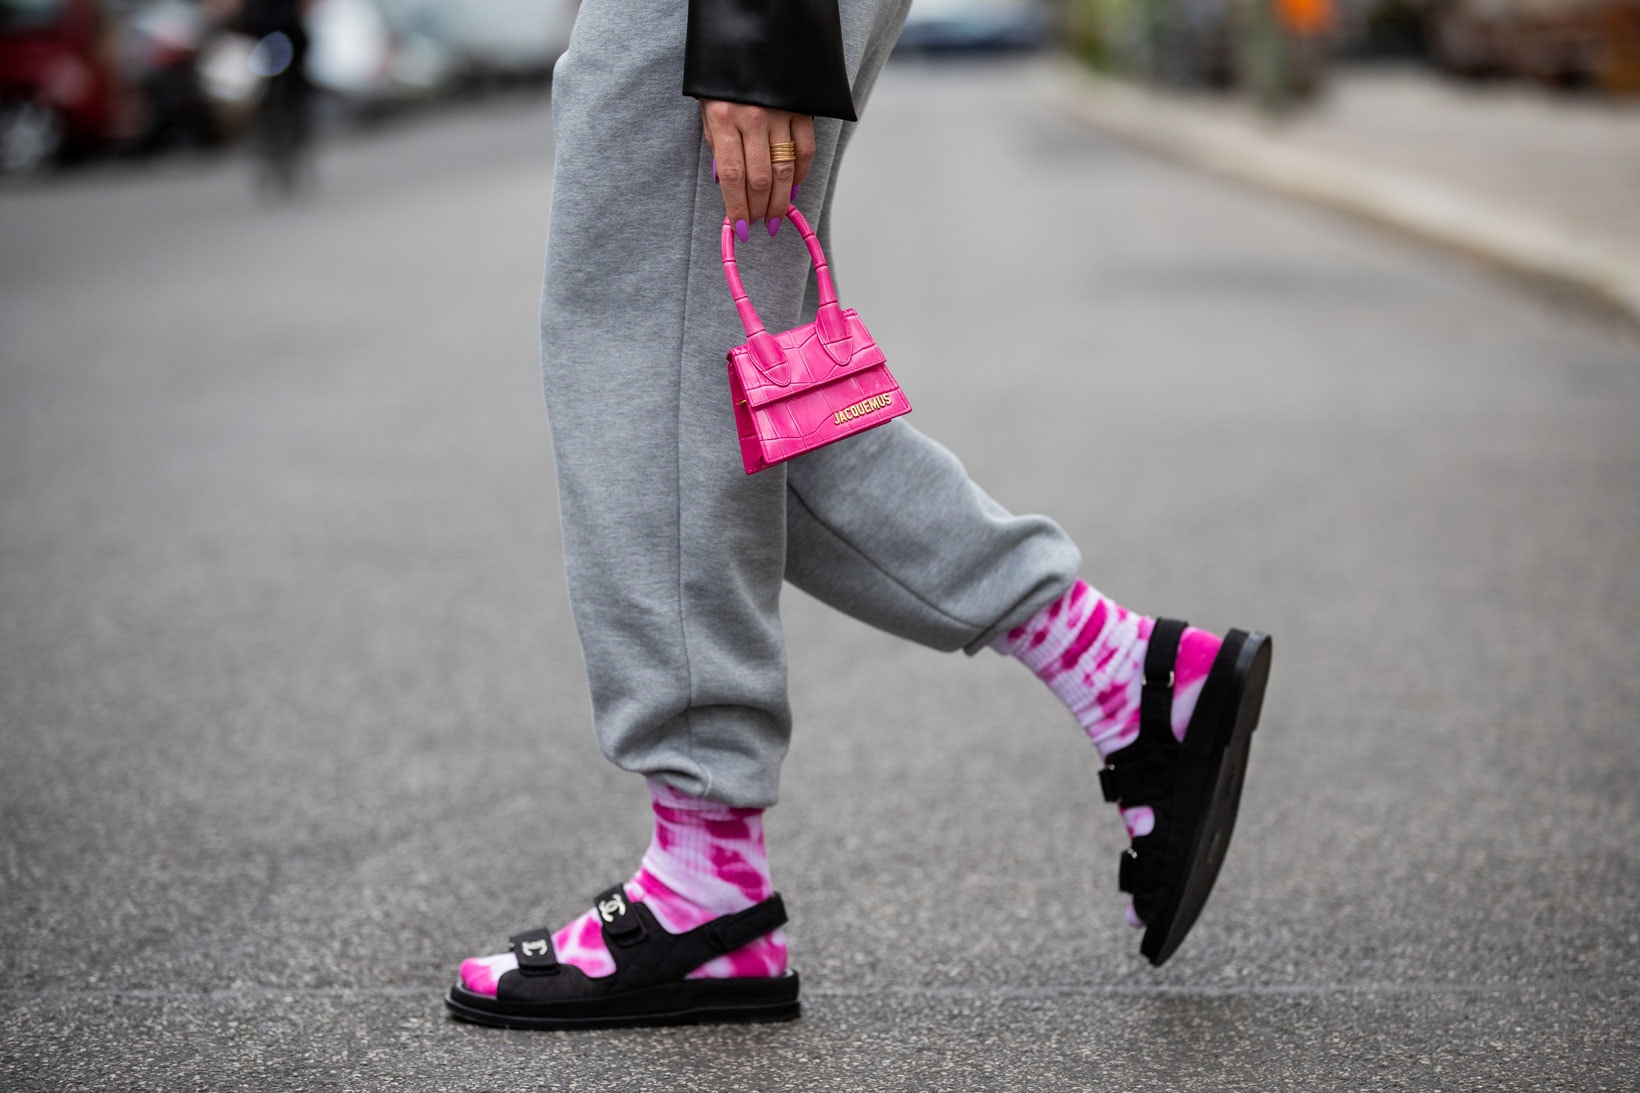 Street Style Berlin 2020 Jacquemus Chiquito Bag Pink Sweatpants Chanel Sandals